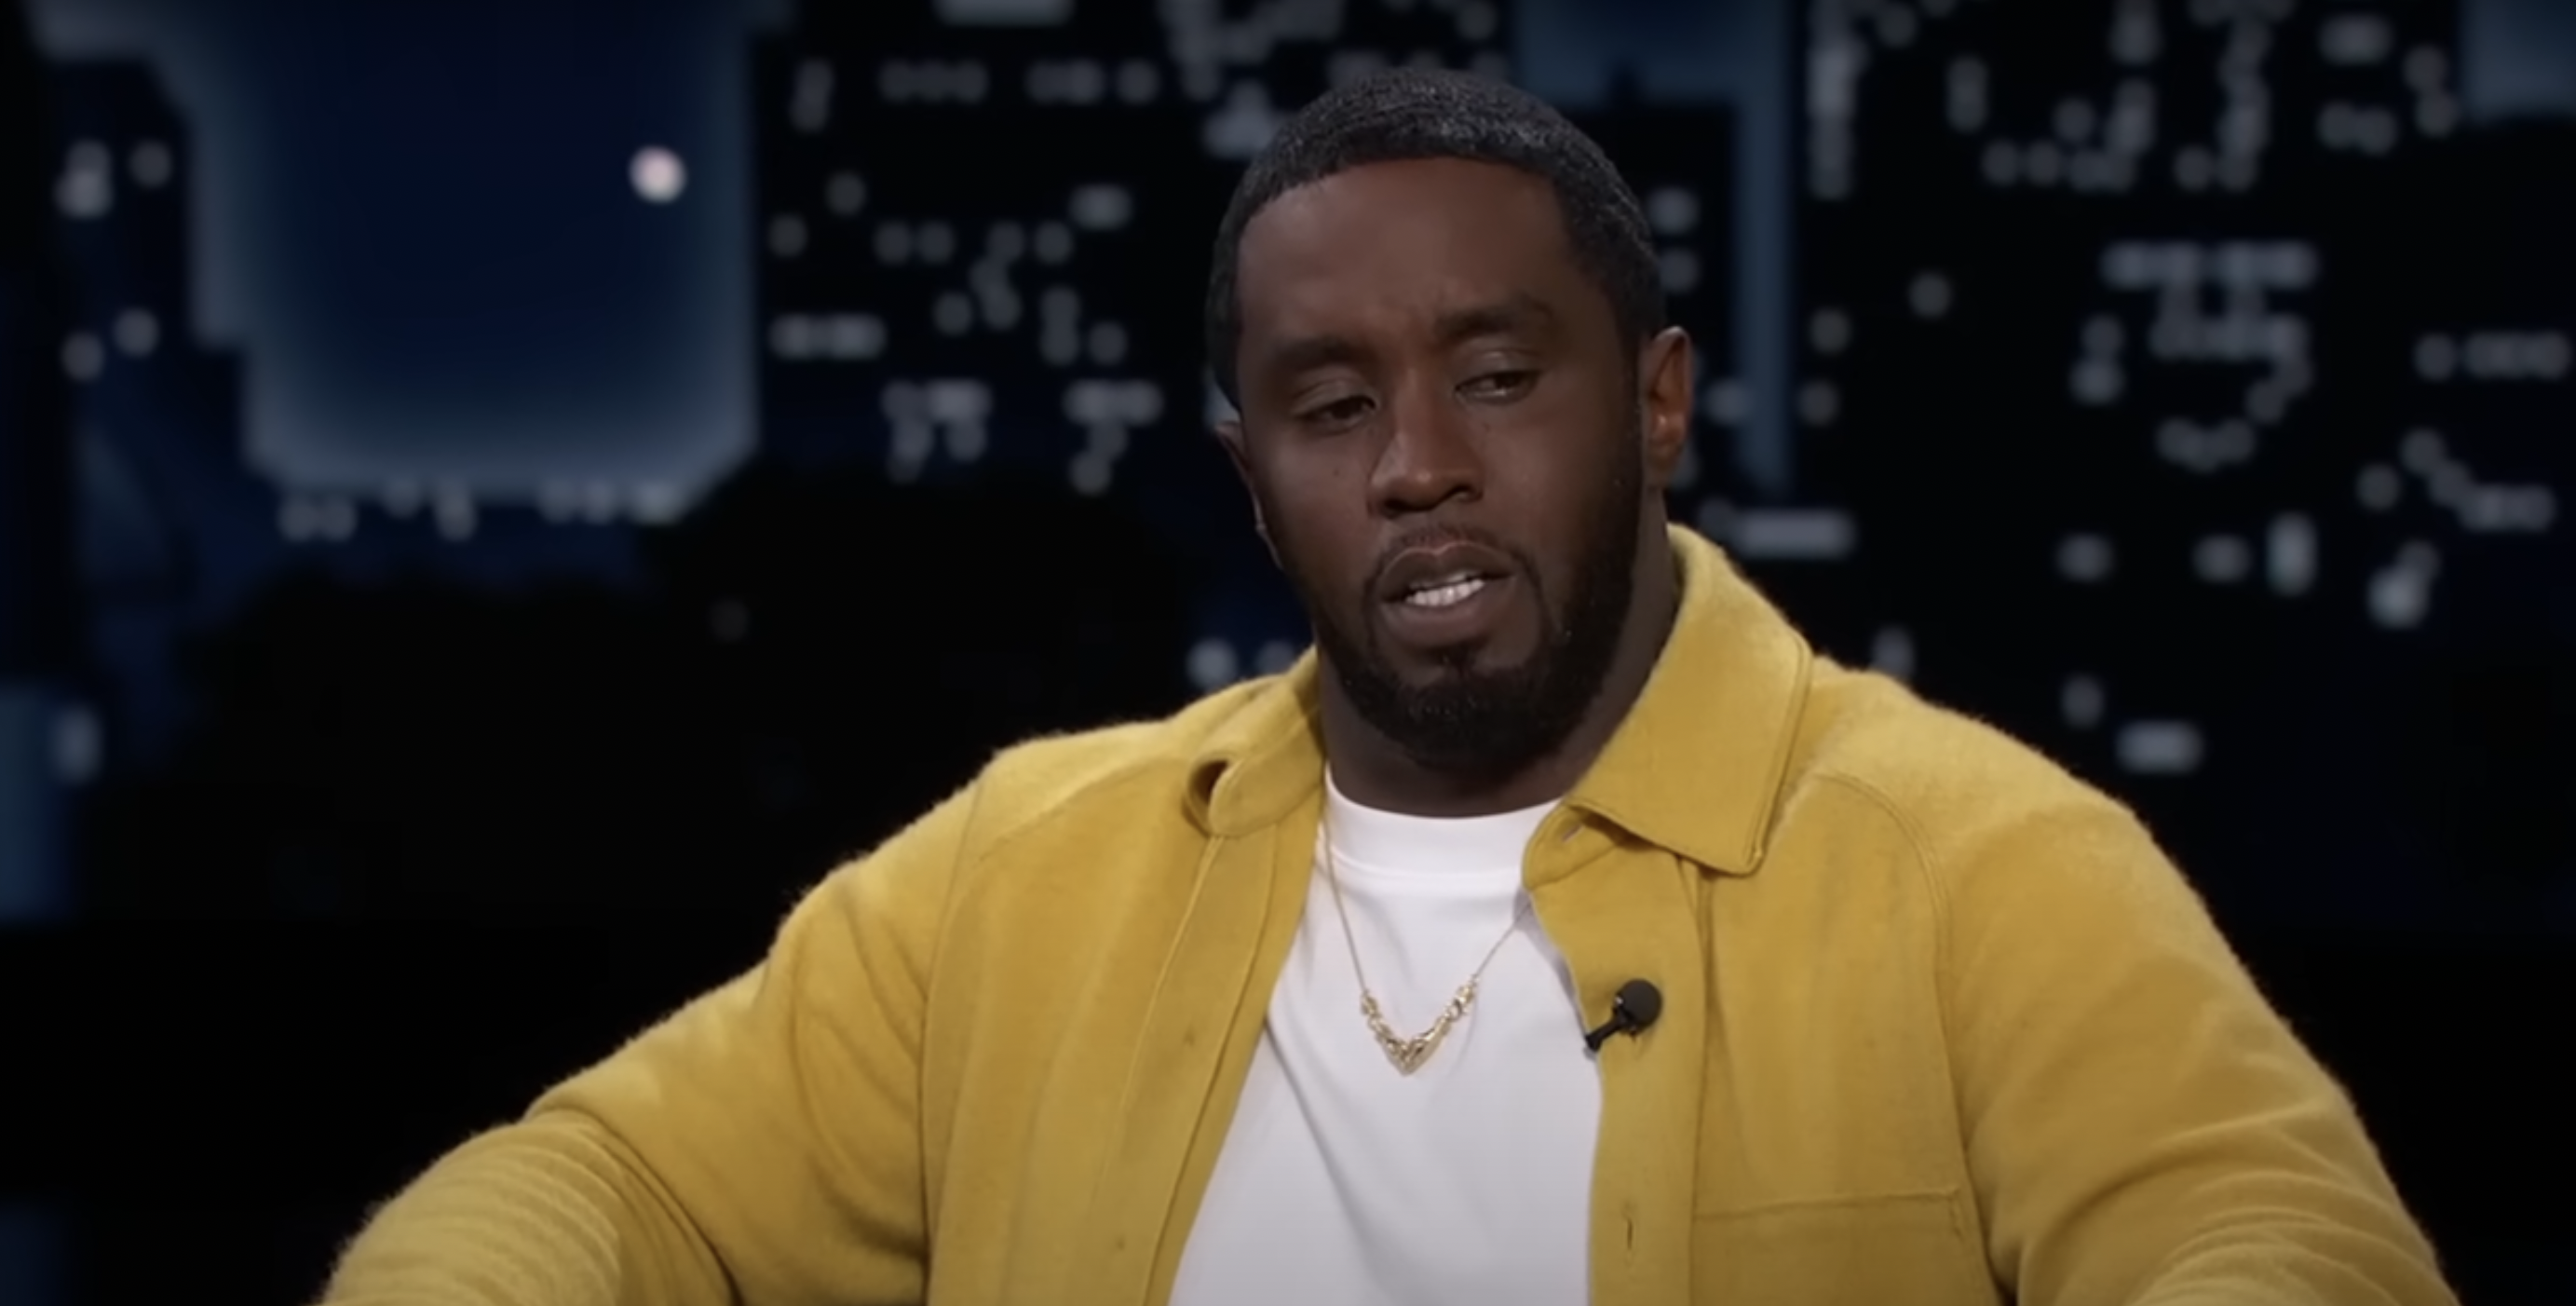 Sean ‘Diddy’ Combs’ Alleged Victims ‘Told FBI Everything’ Before Raids